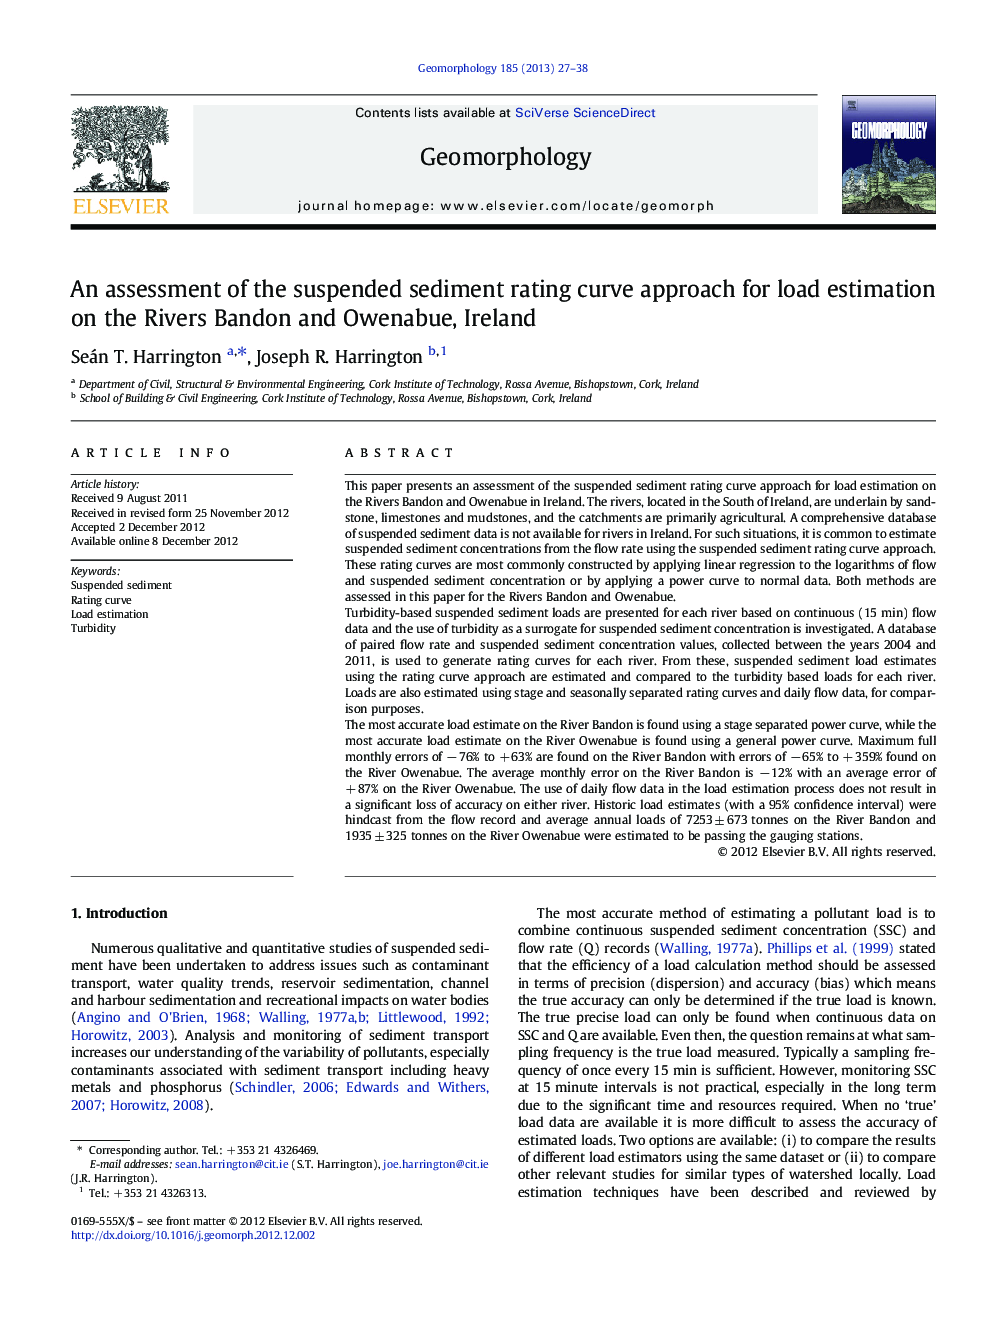 An assessment of the suspended sediment rating curve approach for load estimation on the Rivers Bandon and Owenabue, Ireland